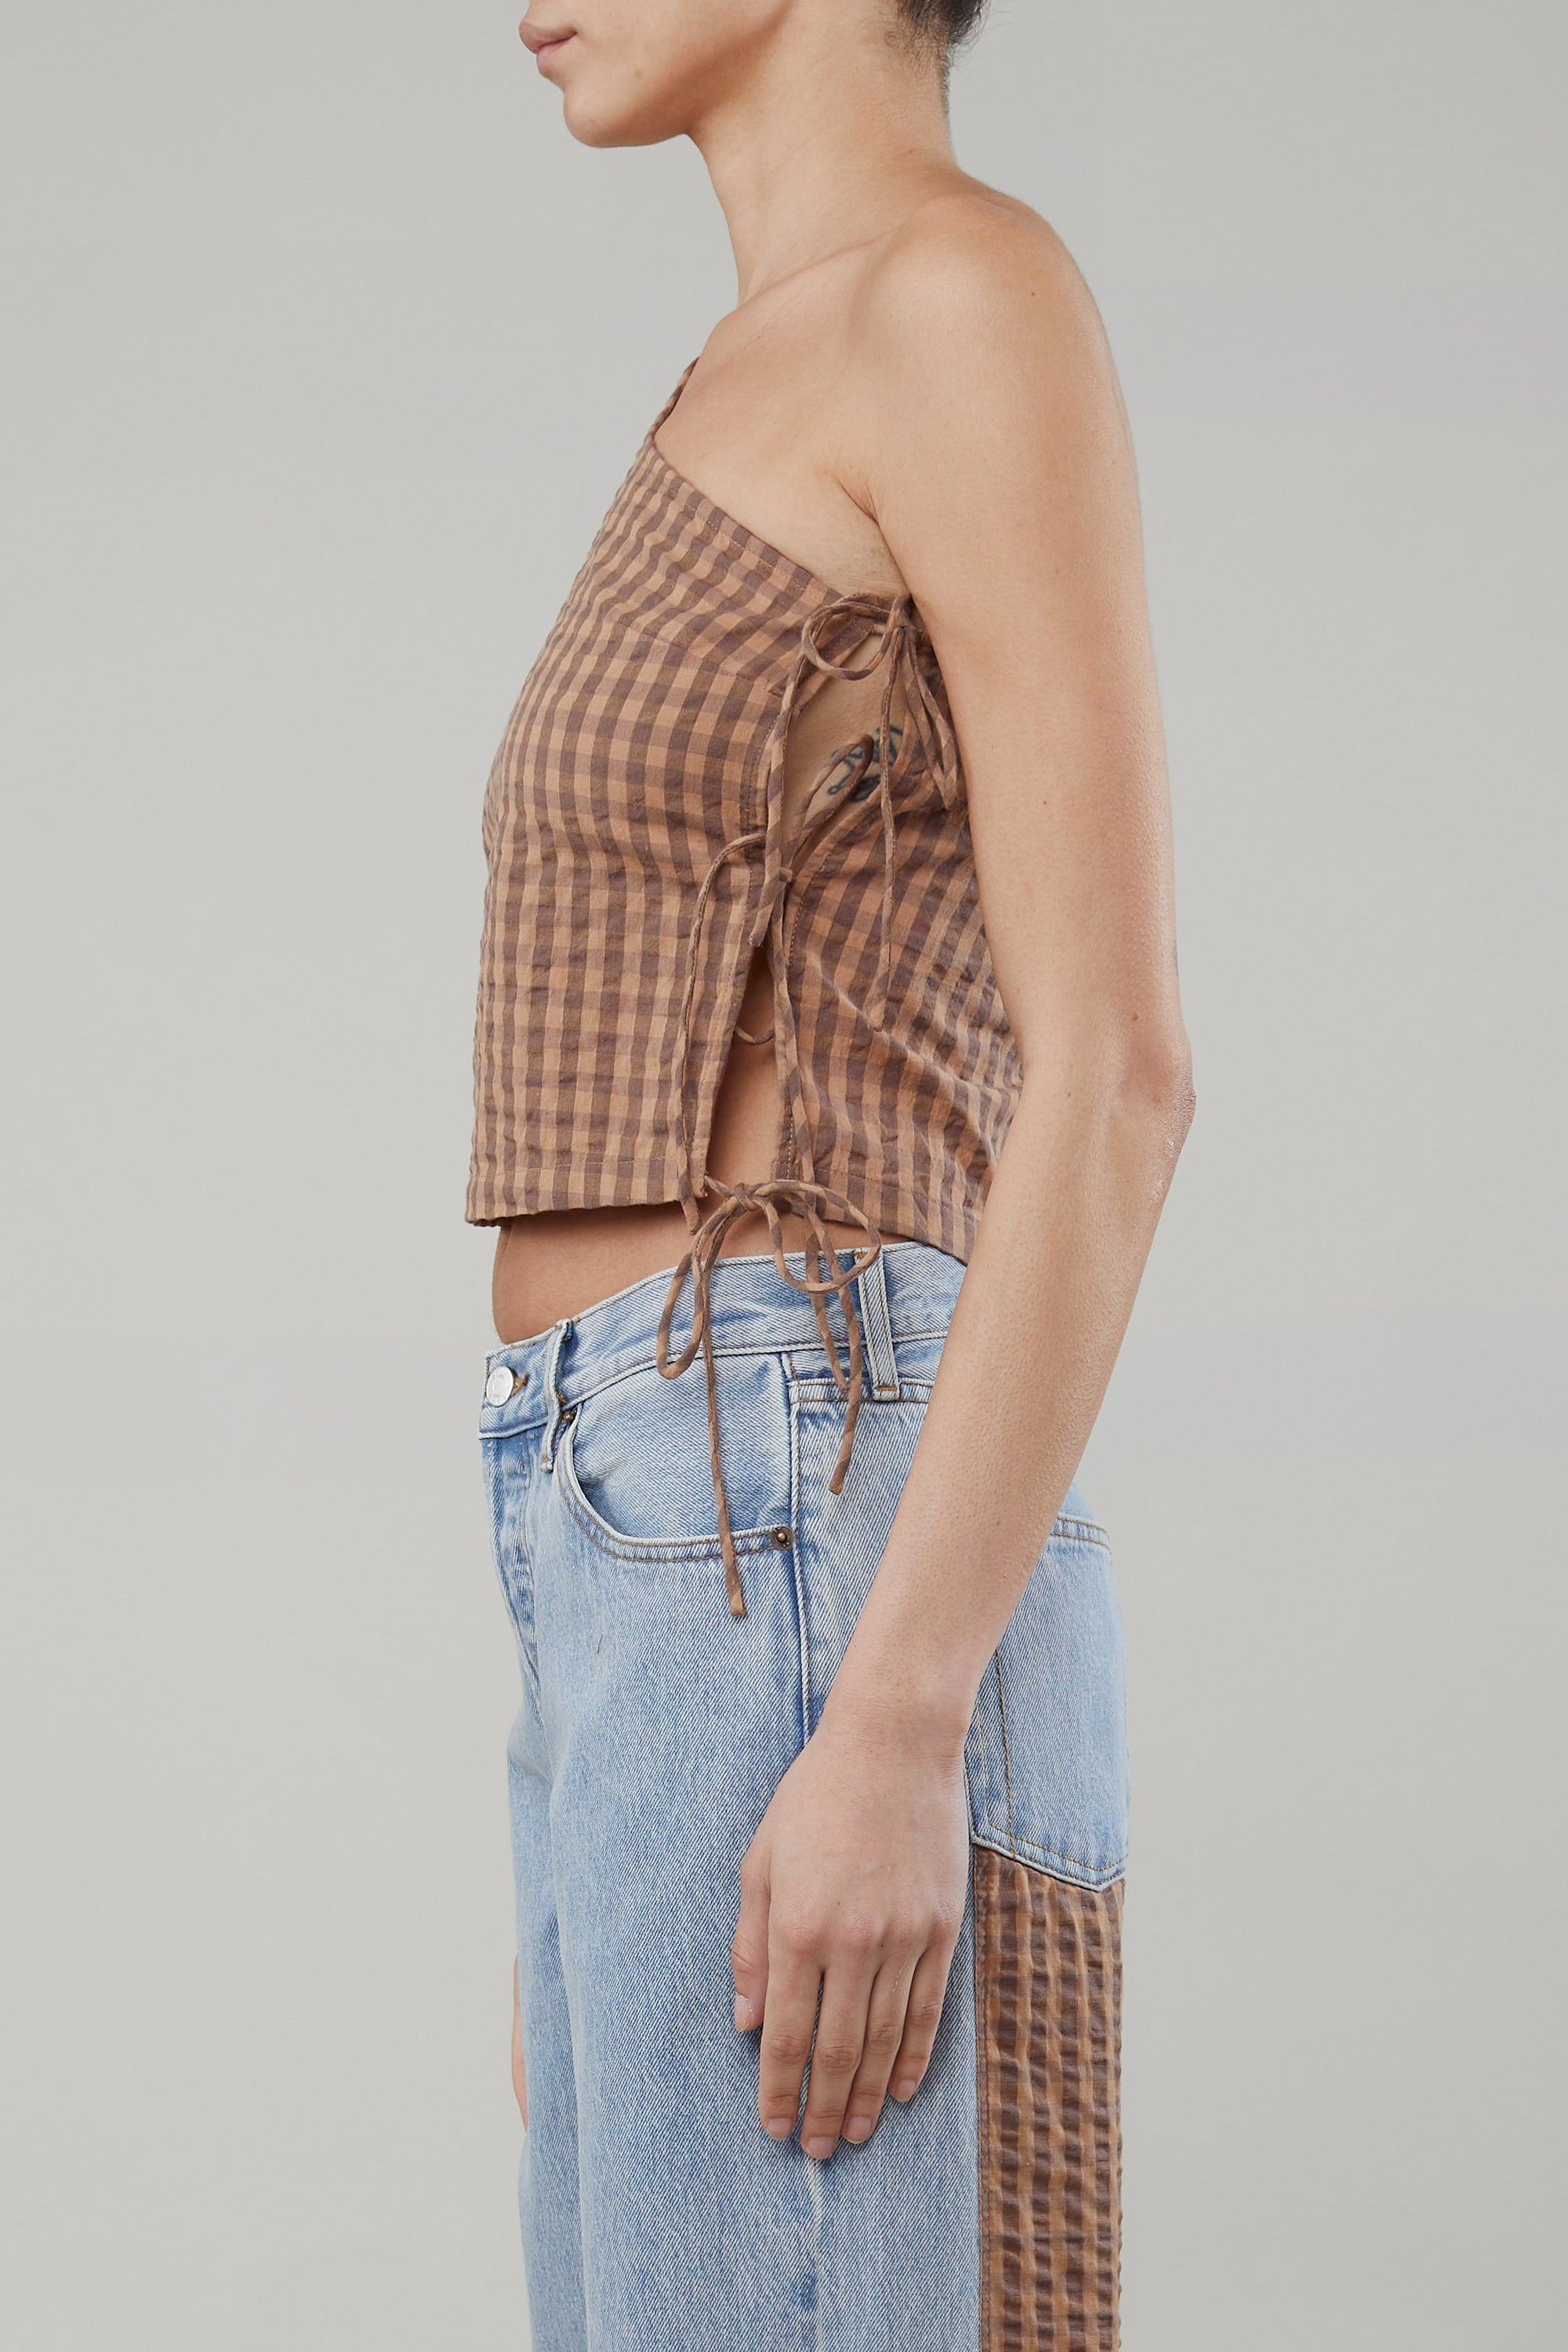 Still Here Amelia one shoulder pecan gingham top | PIPE AND ROW